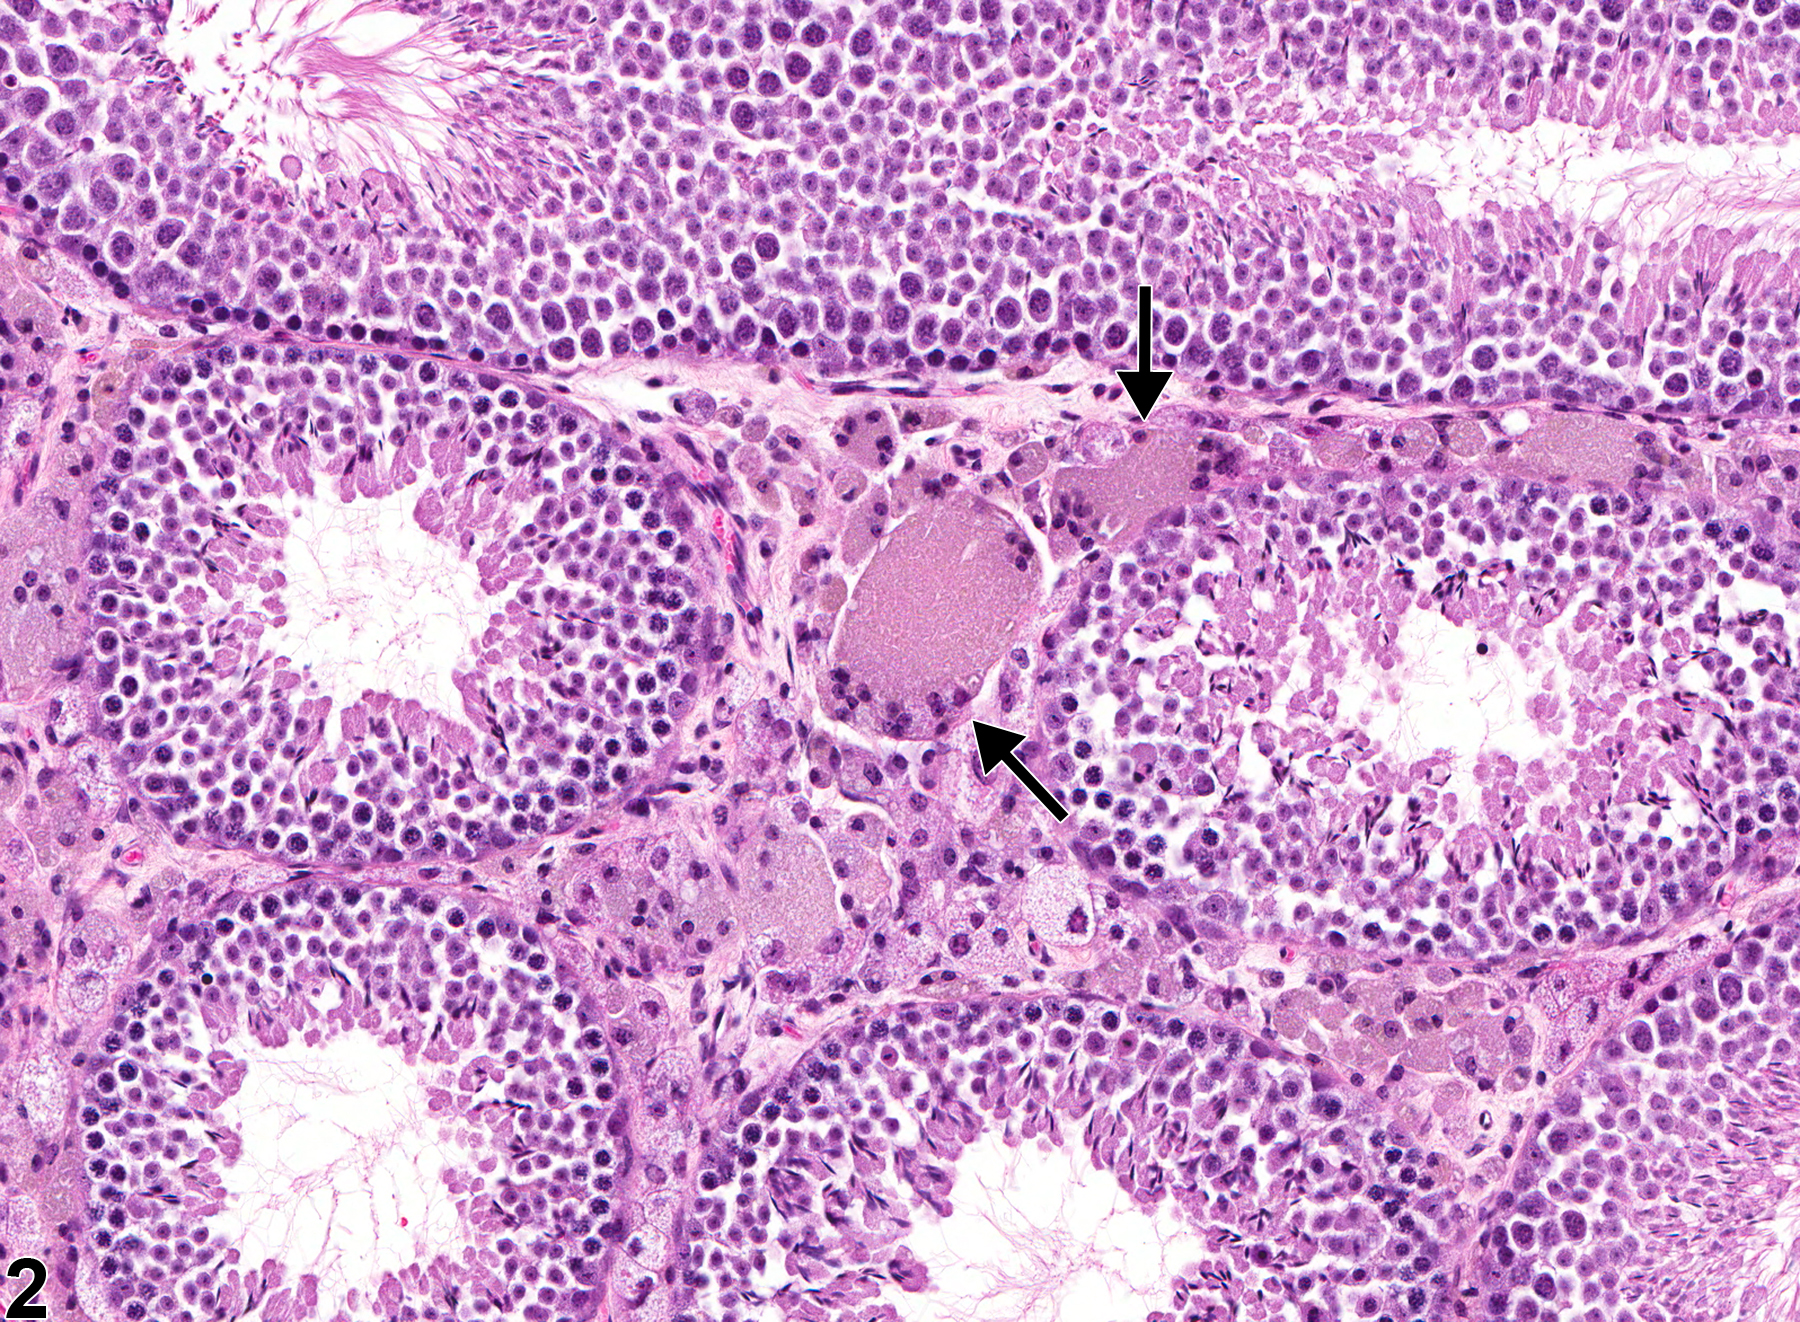 Image of interstitial cell syncytial cells in the testis from a male FVB/N mouse in a chronic study